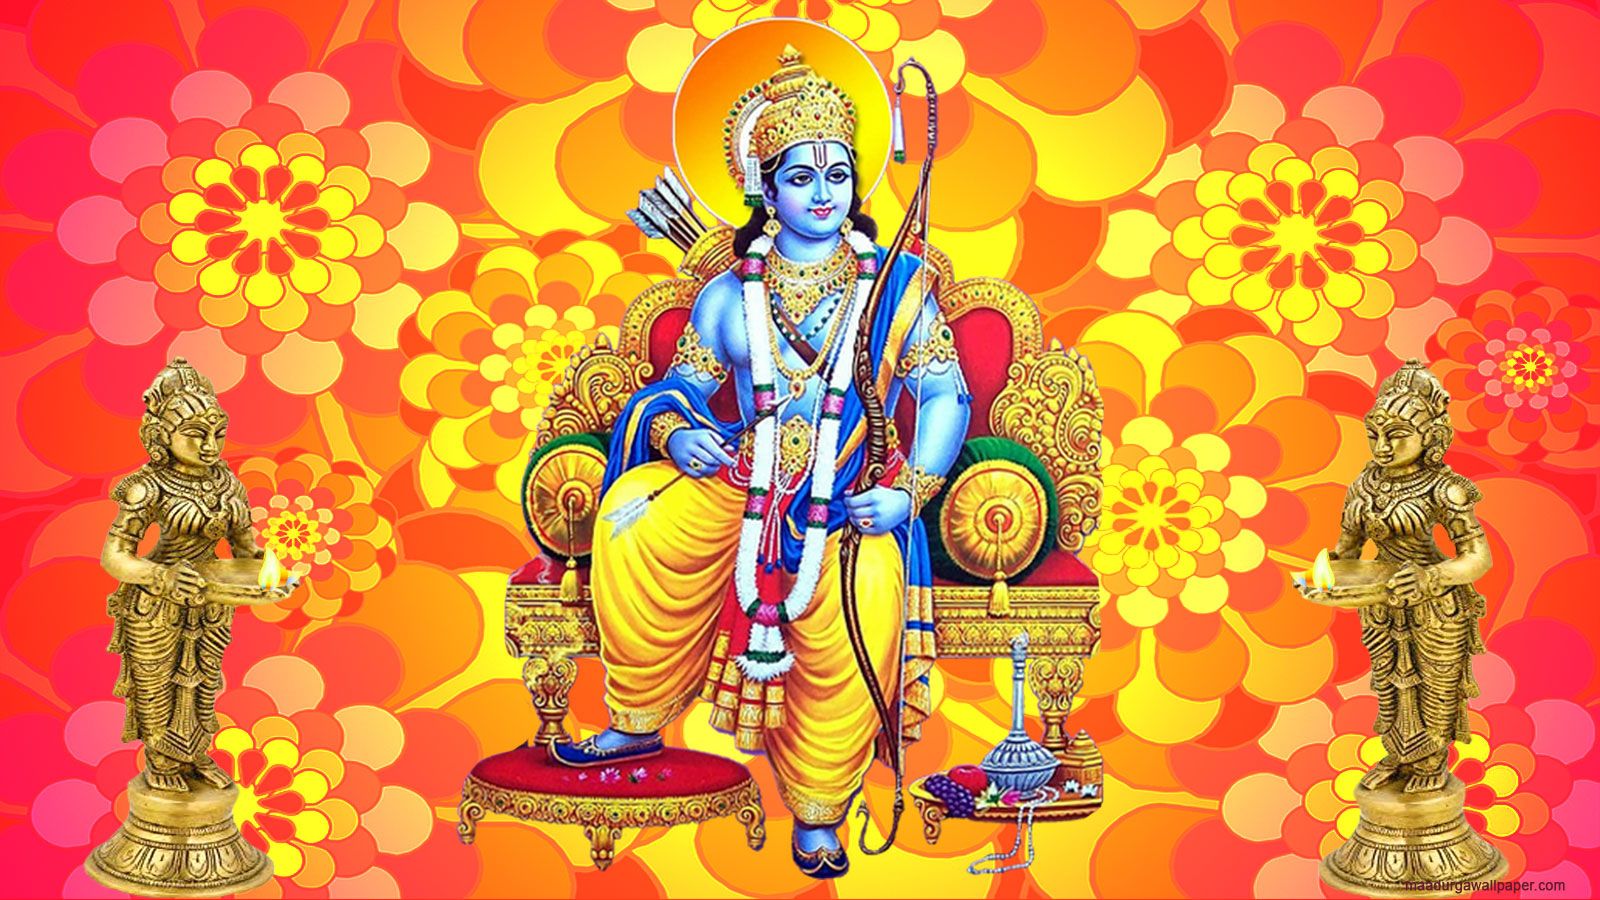 Lord Rama Wallpaper, photo, picture & image download